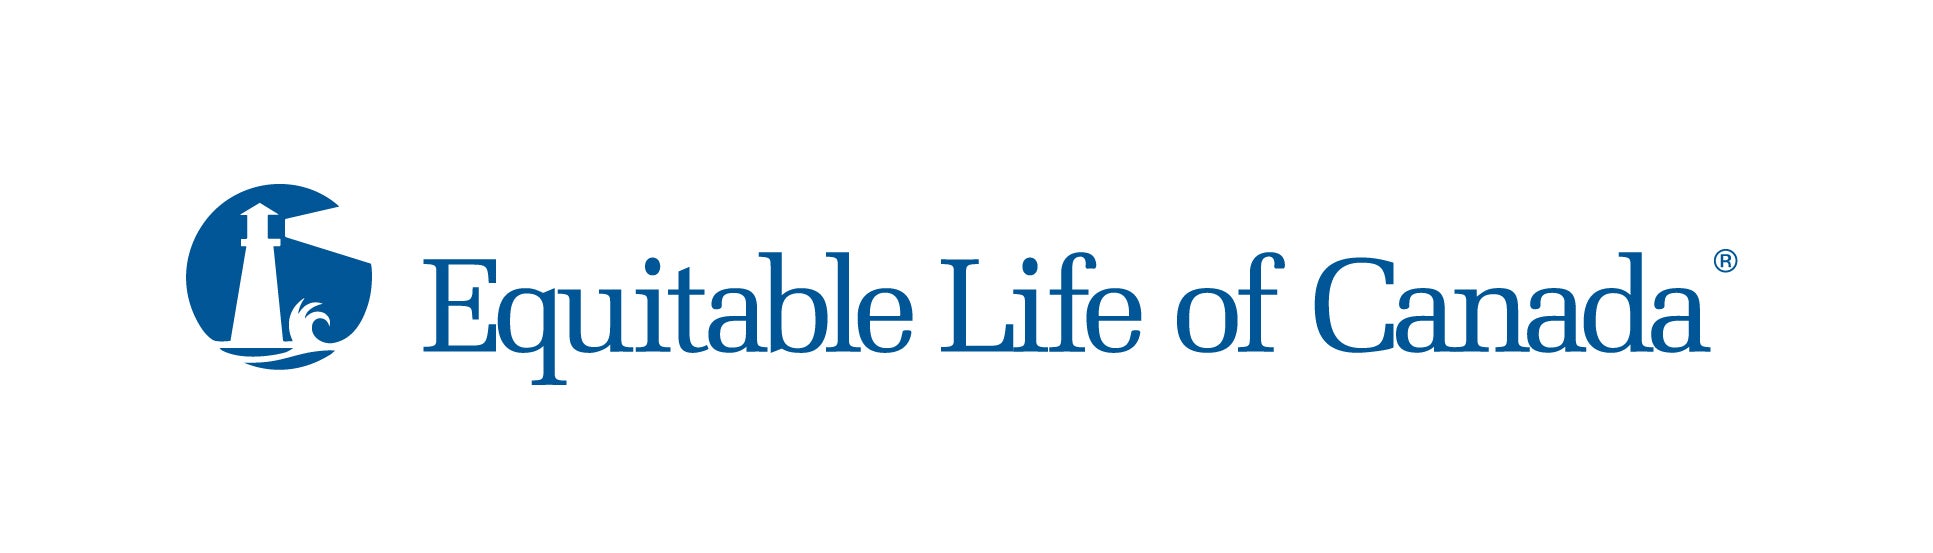 Logo of Equitable Life of Canada